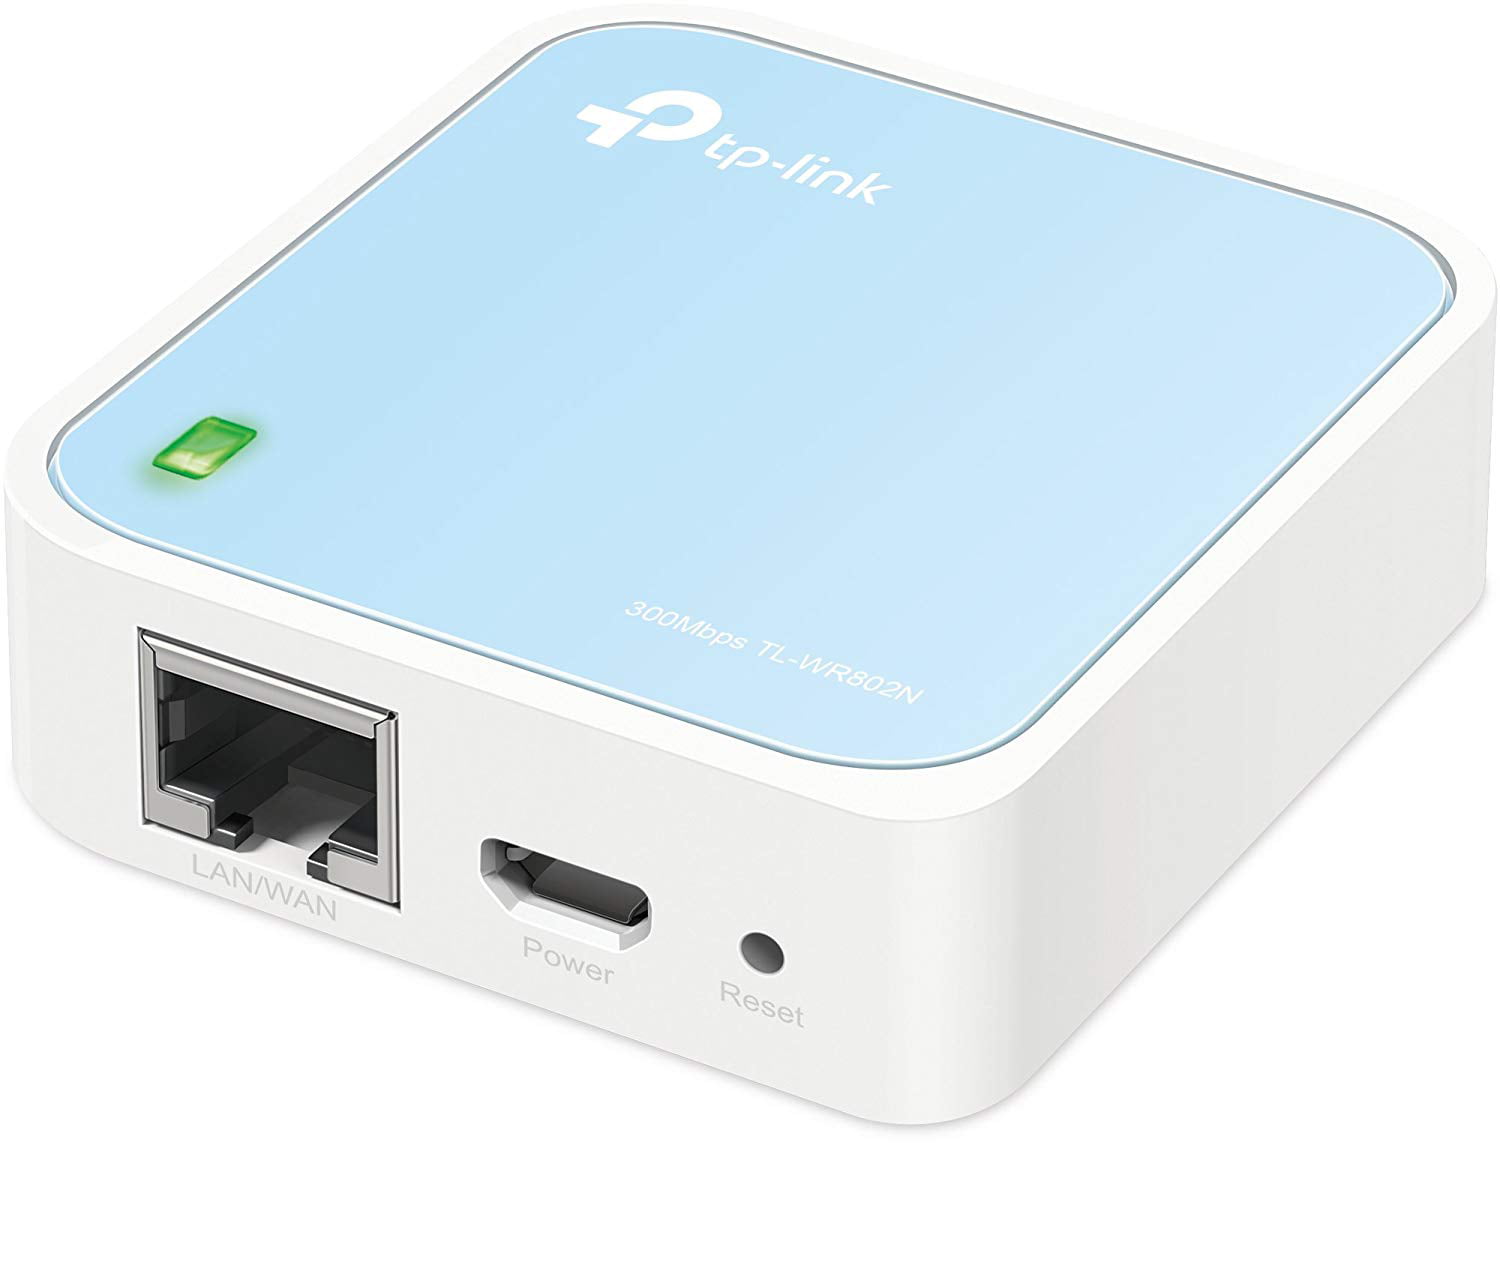 tp link travel router best buy